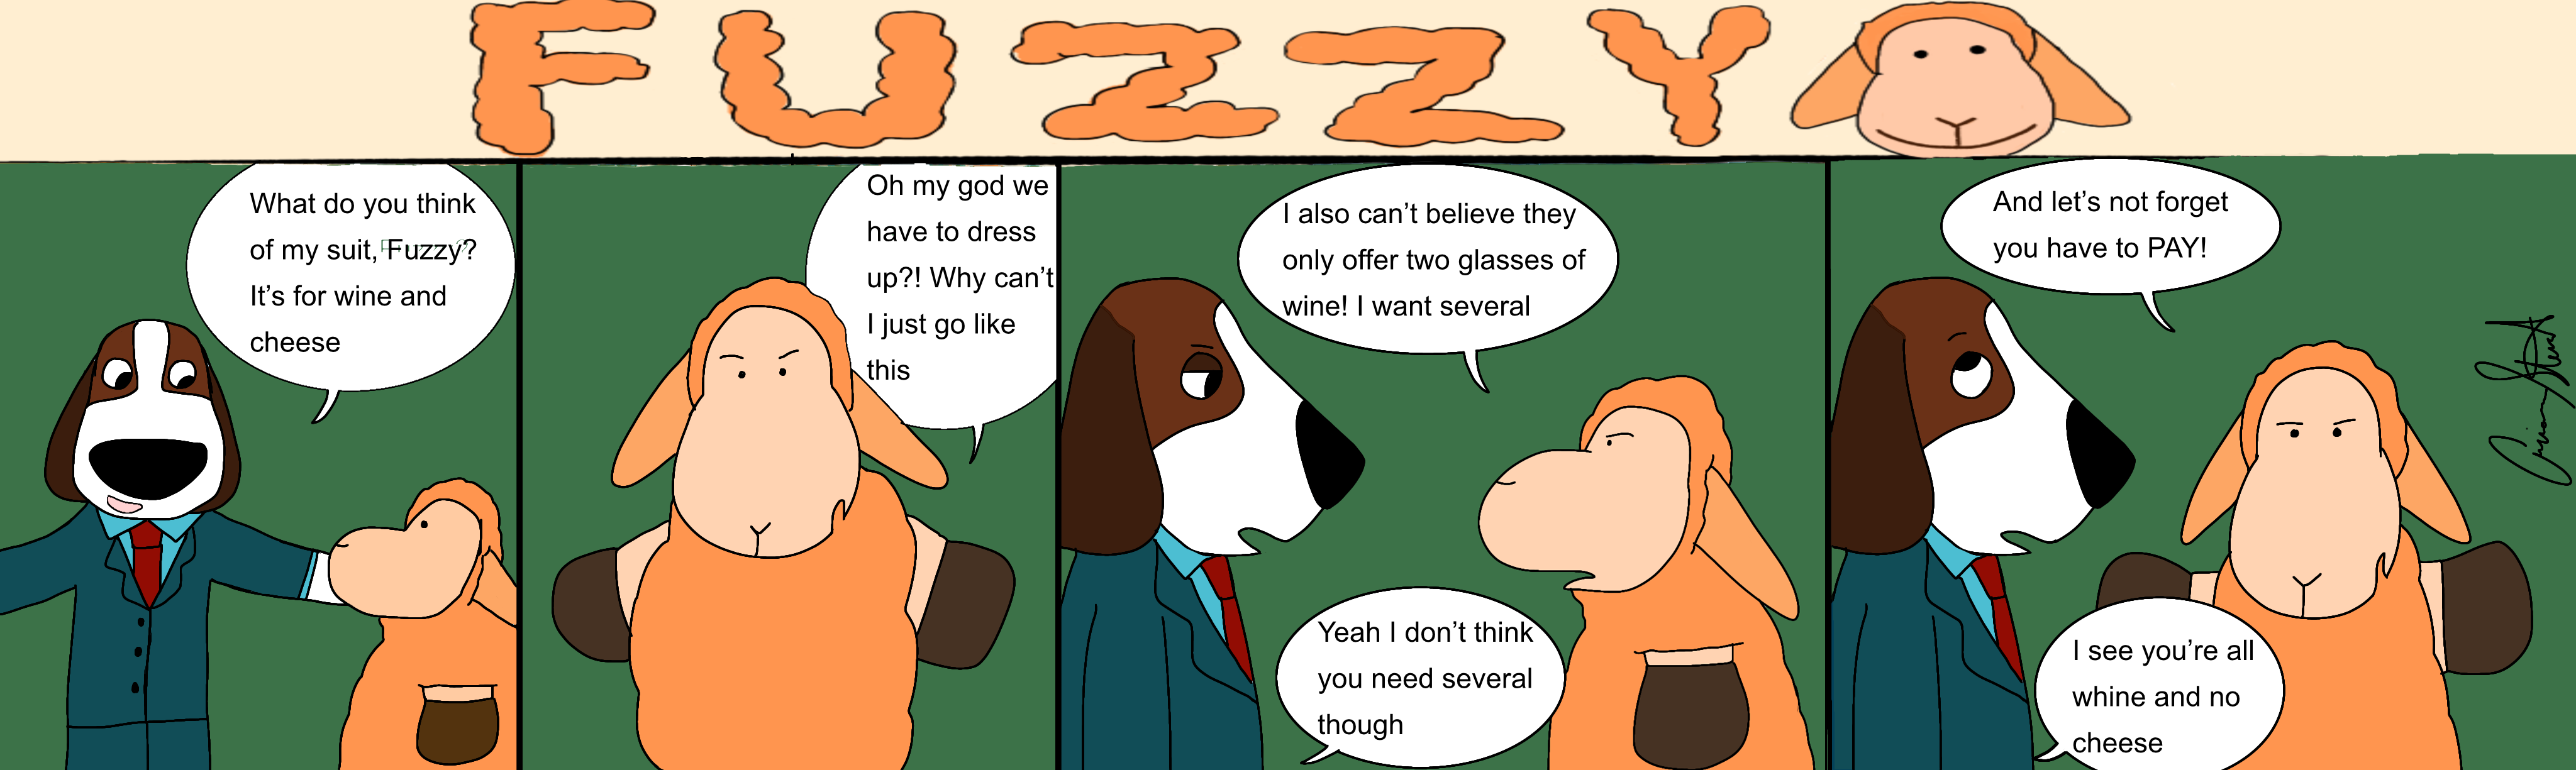 Fuzzy 68: Fuzzy Talks About Senior Wine and Cheese | Flat Hat News